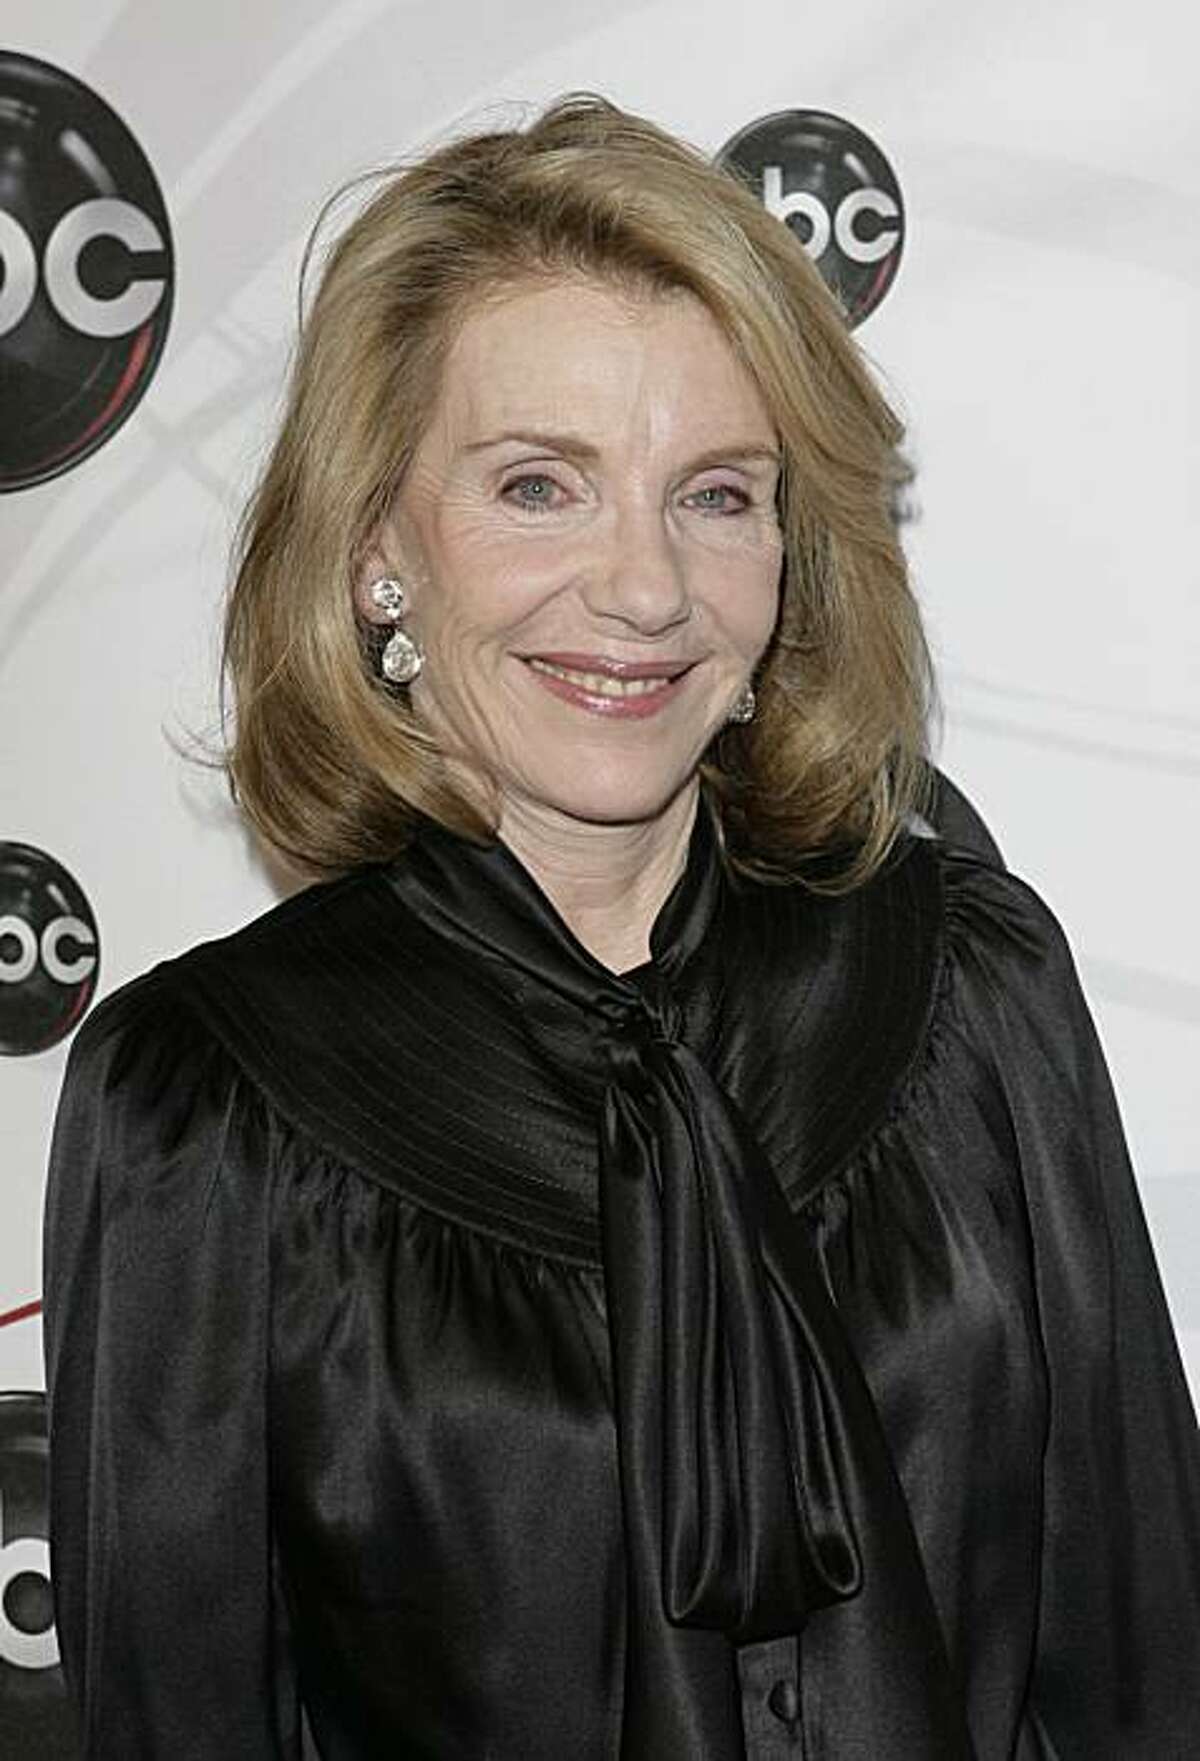 FILE - In this May 15, 2007 file photo, Jill Clayburgh, star of "Dirty Sexy Money" poses for photographers on the red carpet during the arrivals of ABC's 2007-2008 preview in New York. In one of her final roles Jill Clayburgh plays the mom of charismaticViagra salesman Jamie Reidy (Jake Gyllenhaal) in the romantic comedy "Love and Other Drugs."